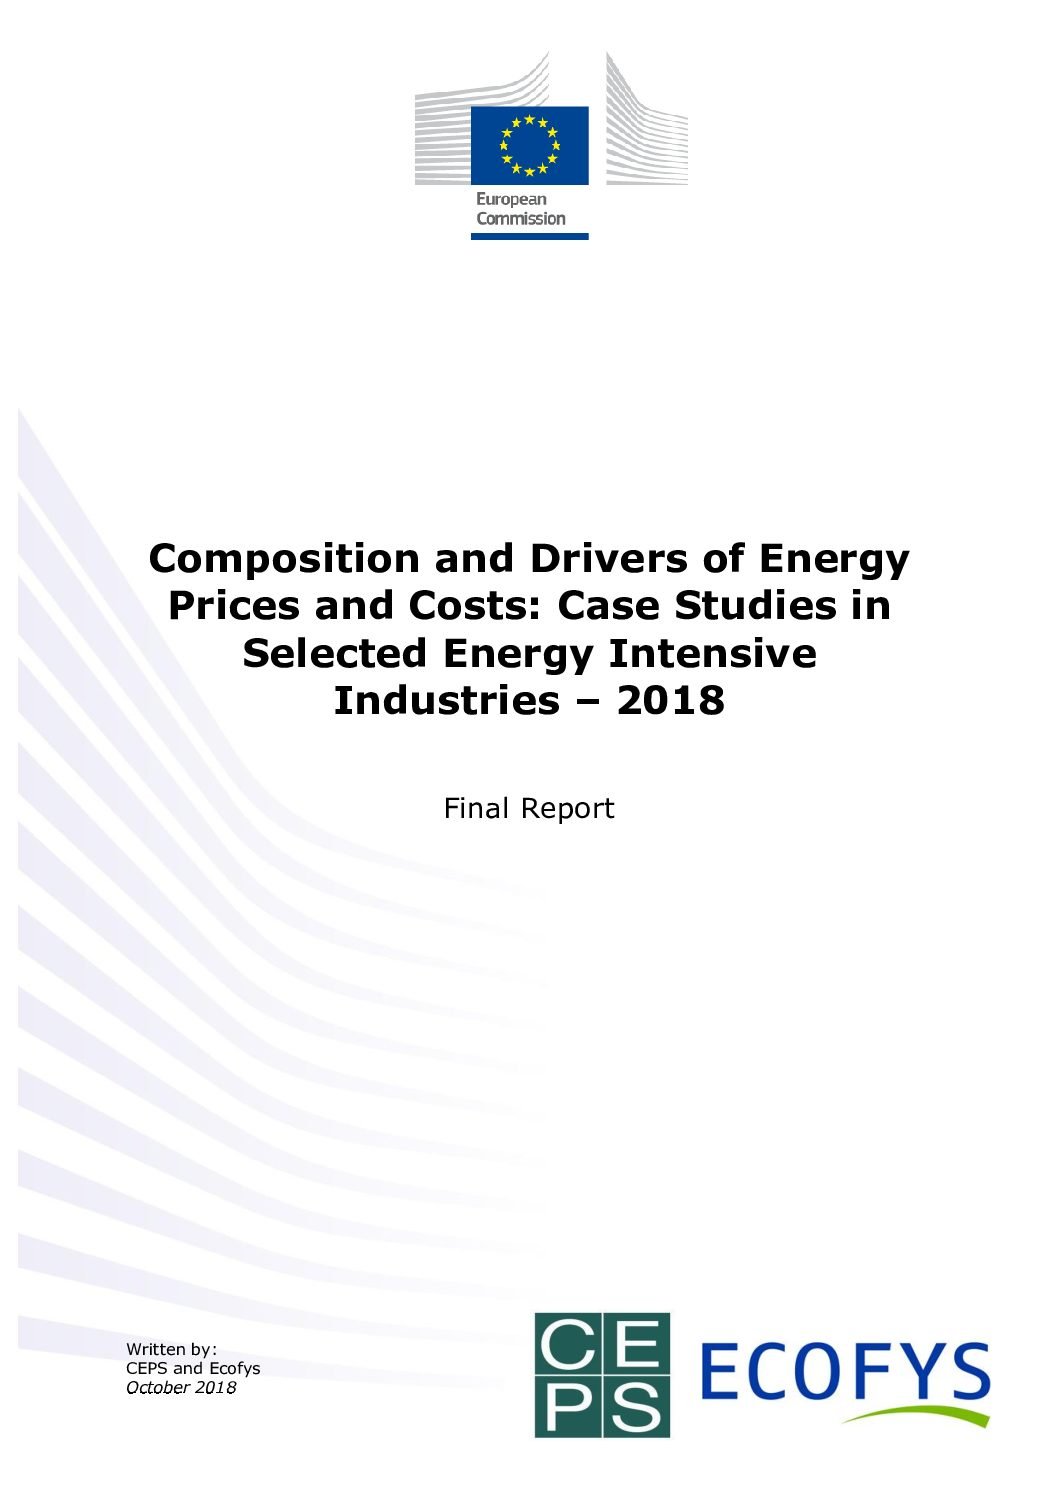 Composition and Drivers of Energy Prices and Costs: Case Studies in Selected Energy Intensive Industries – 2018